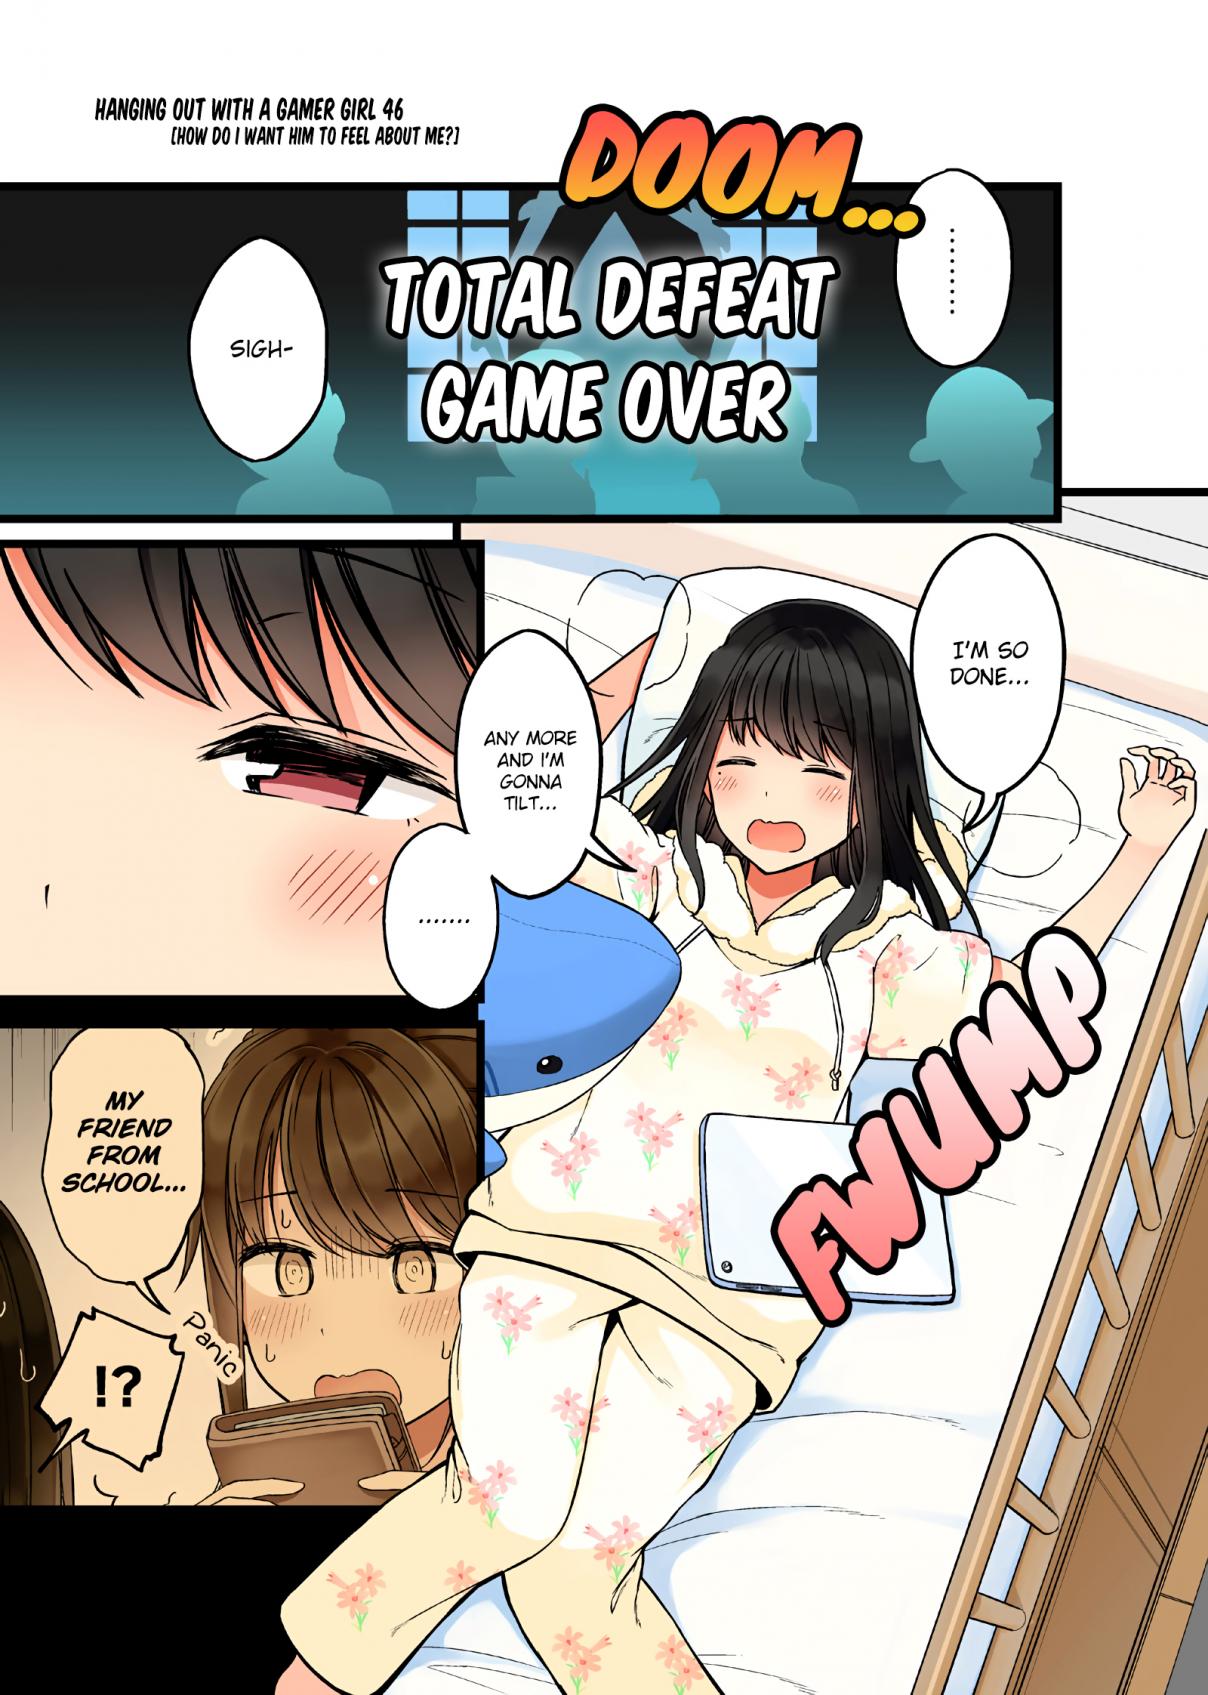 Hanging Out with a Gamer Girl Ch. 46 How Do I Want Him to Feel About Me?